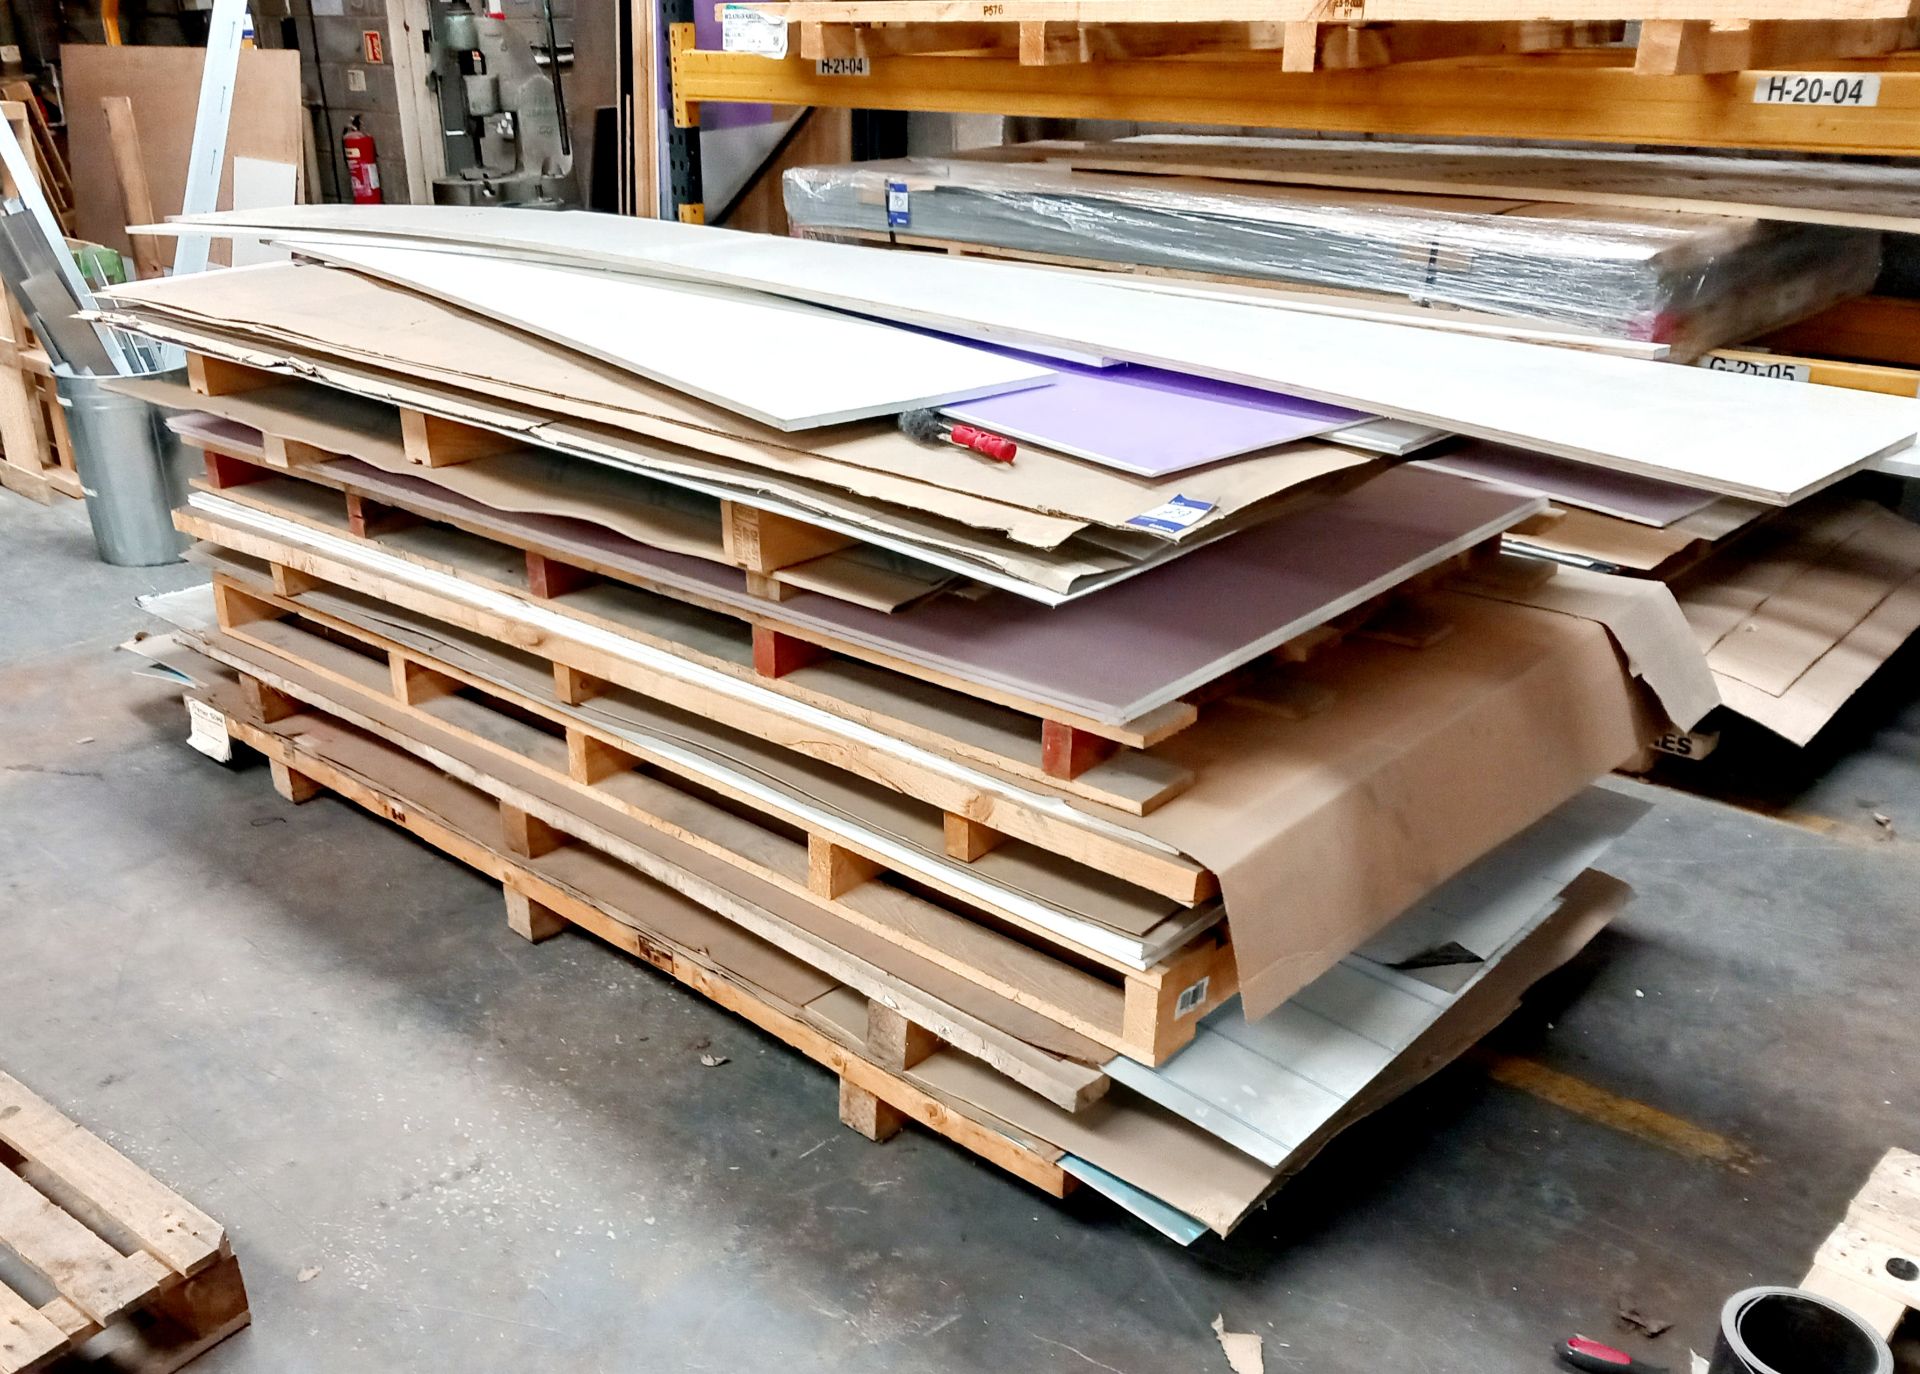 Quantity of various material sheet stock to include steel, plasterboard, plastic (various sizes)